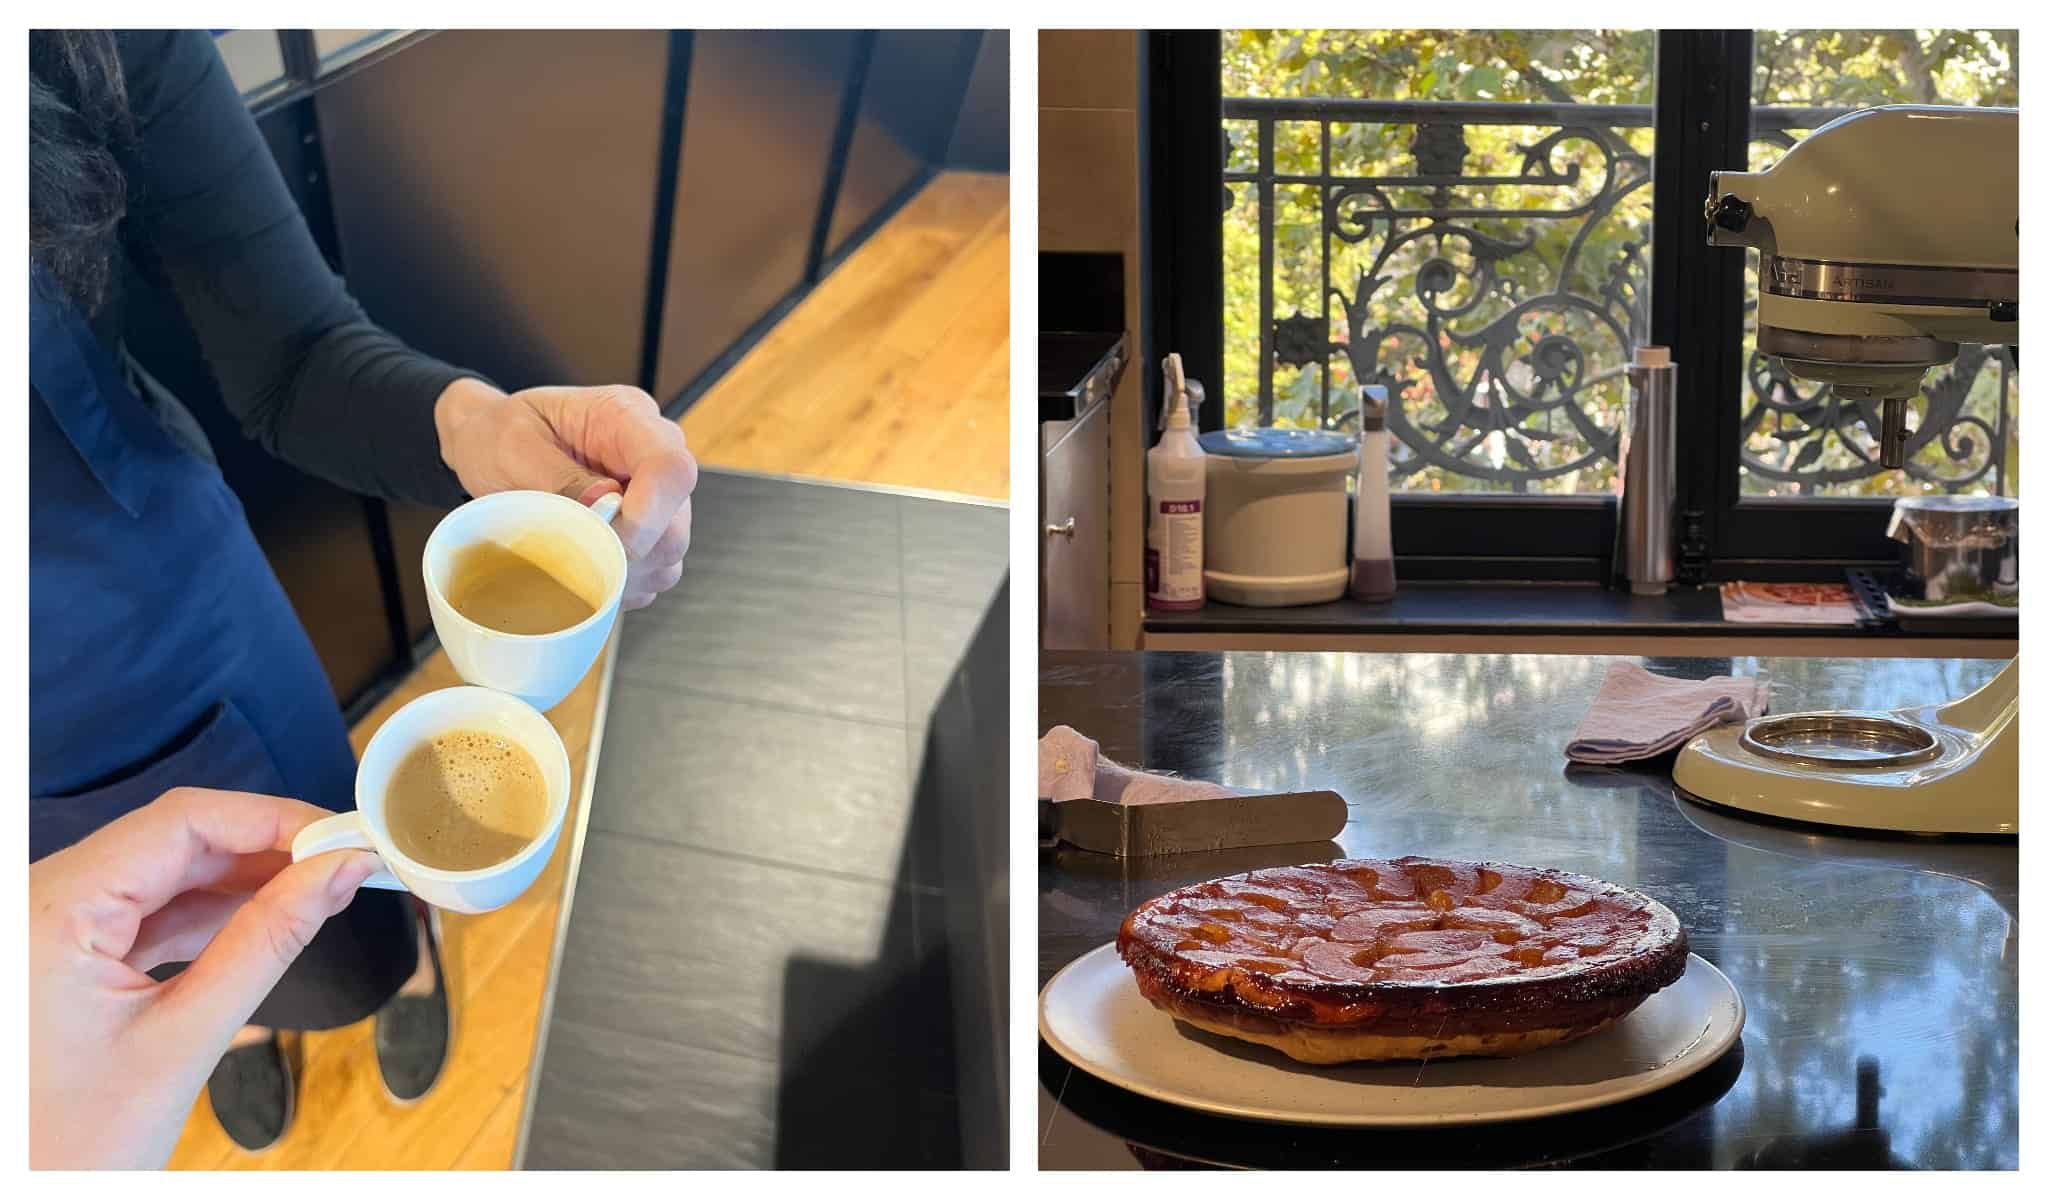 Left: Two espressos held by participants of tarte tatin cooking class/ Right: Freshly baked large tarte tatin on display during cooking class.